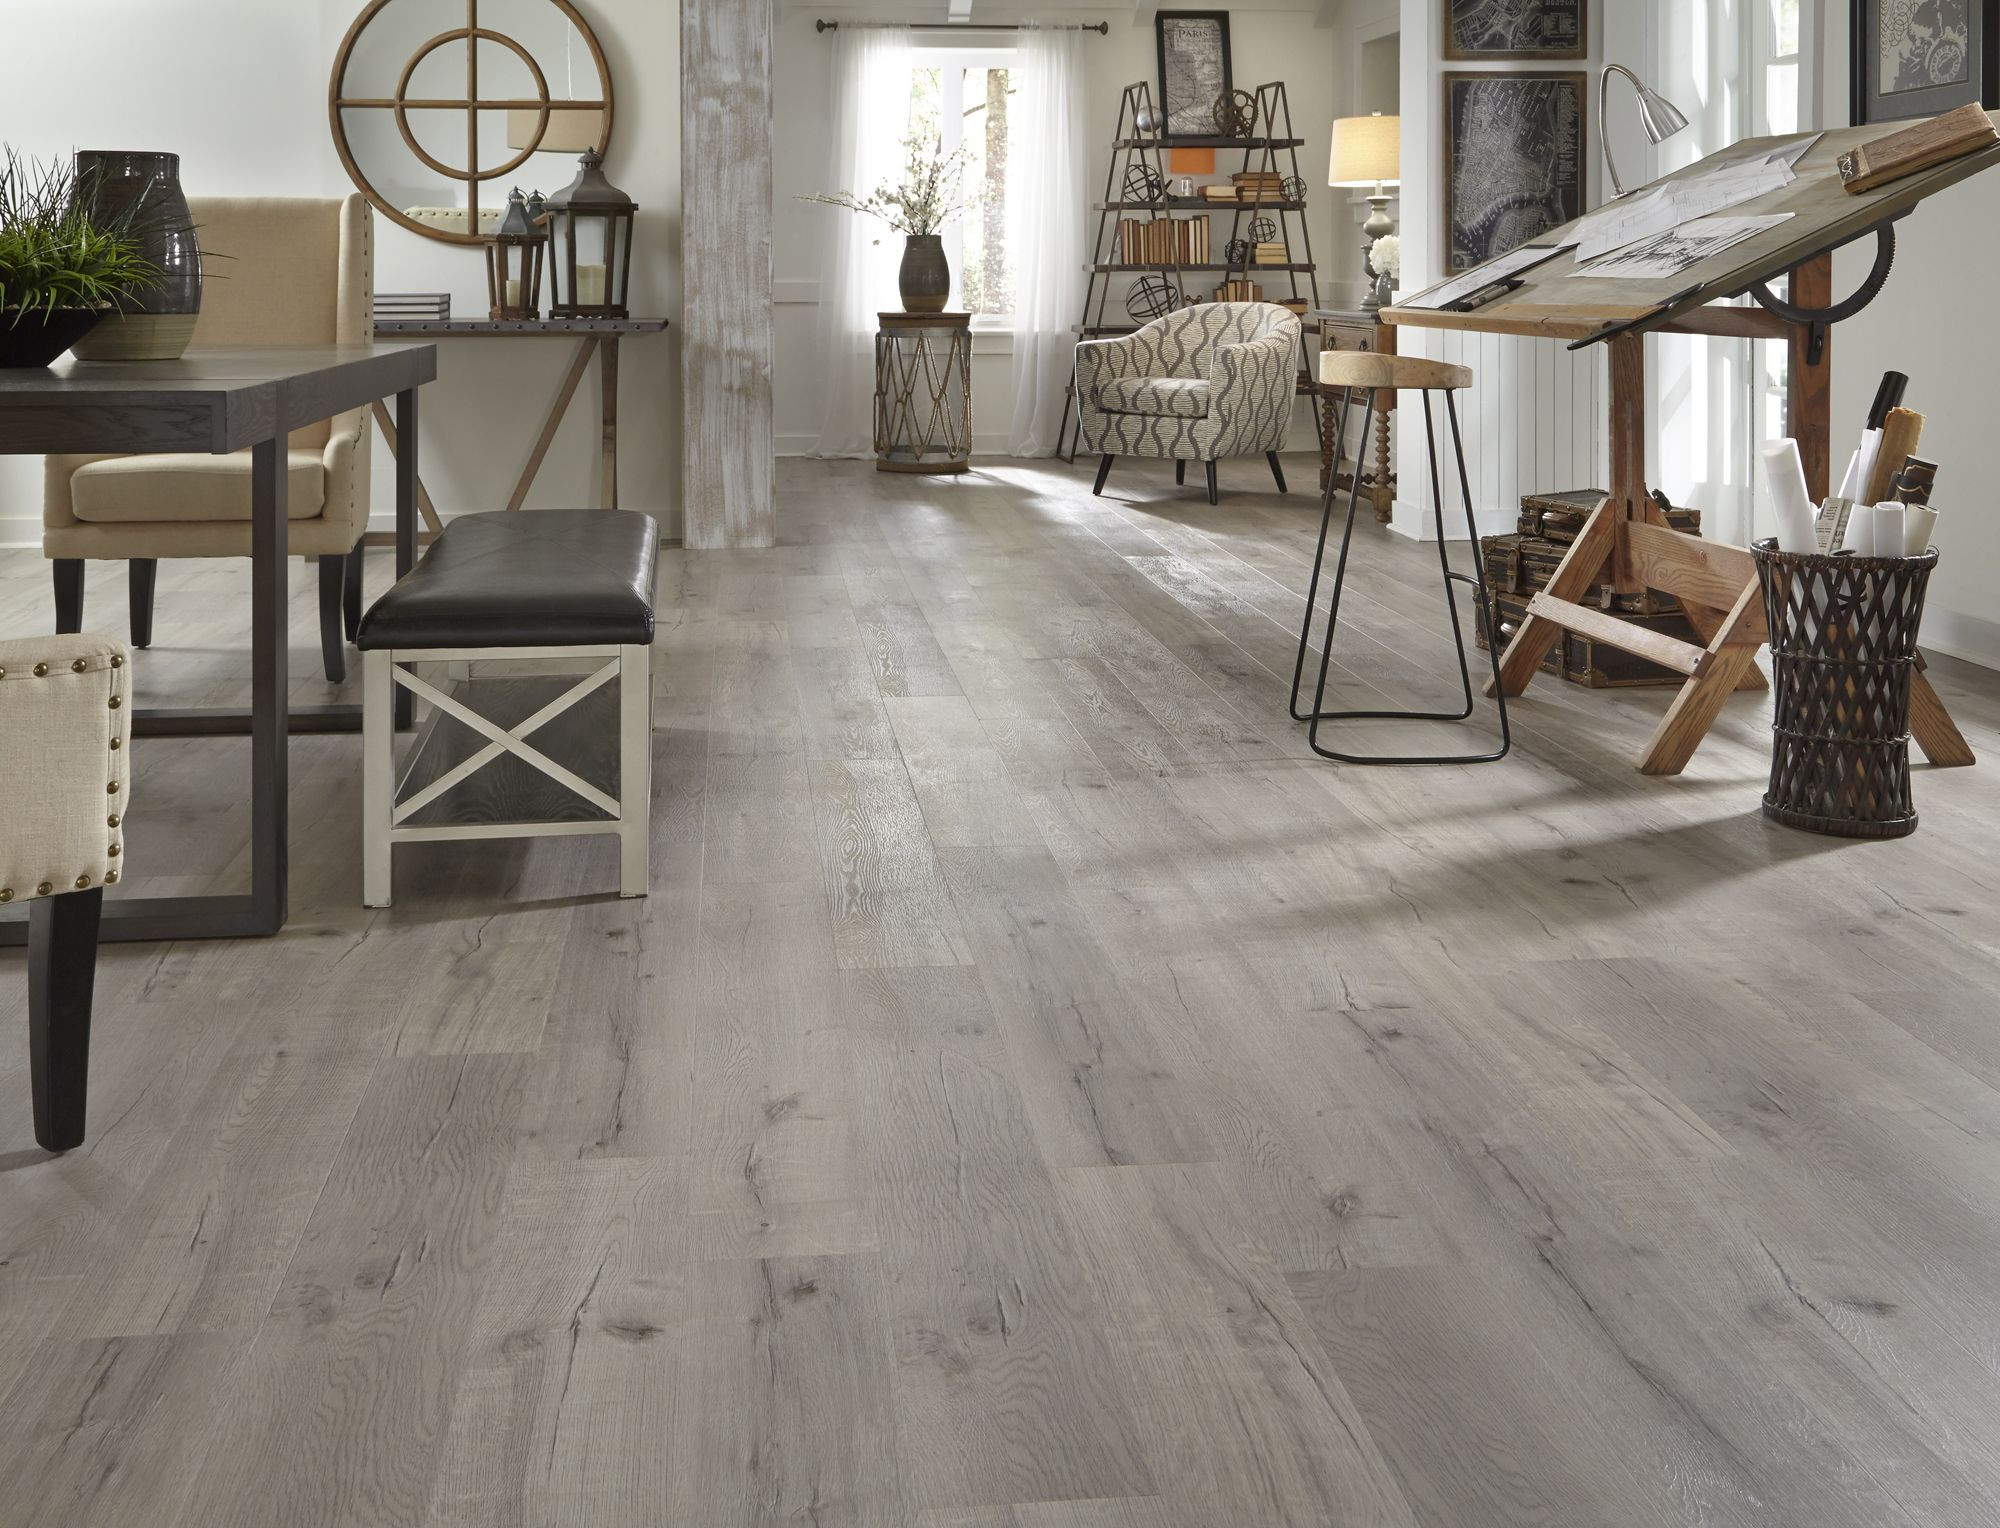 select grade hickory hardwood flooring of this fall flooring season see 100 new flooring styles like driftwood throughout this fall flooring season see 100 new flooring styles like driftwood hickory evp its part of a new line of waterproof flooring thats ideal for any space